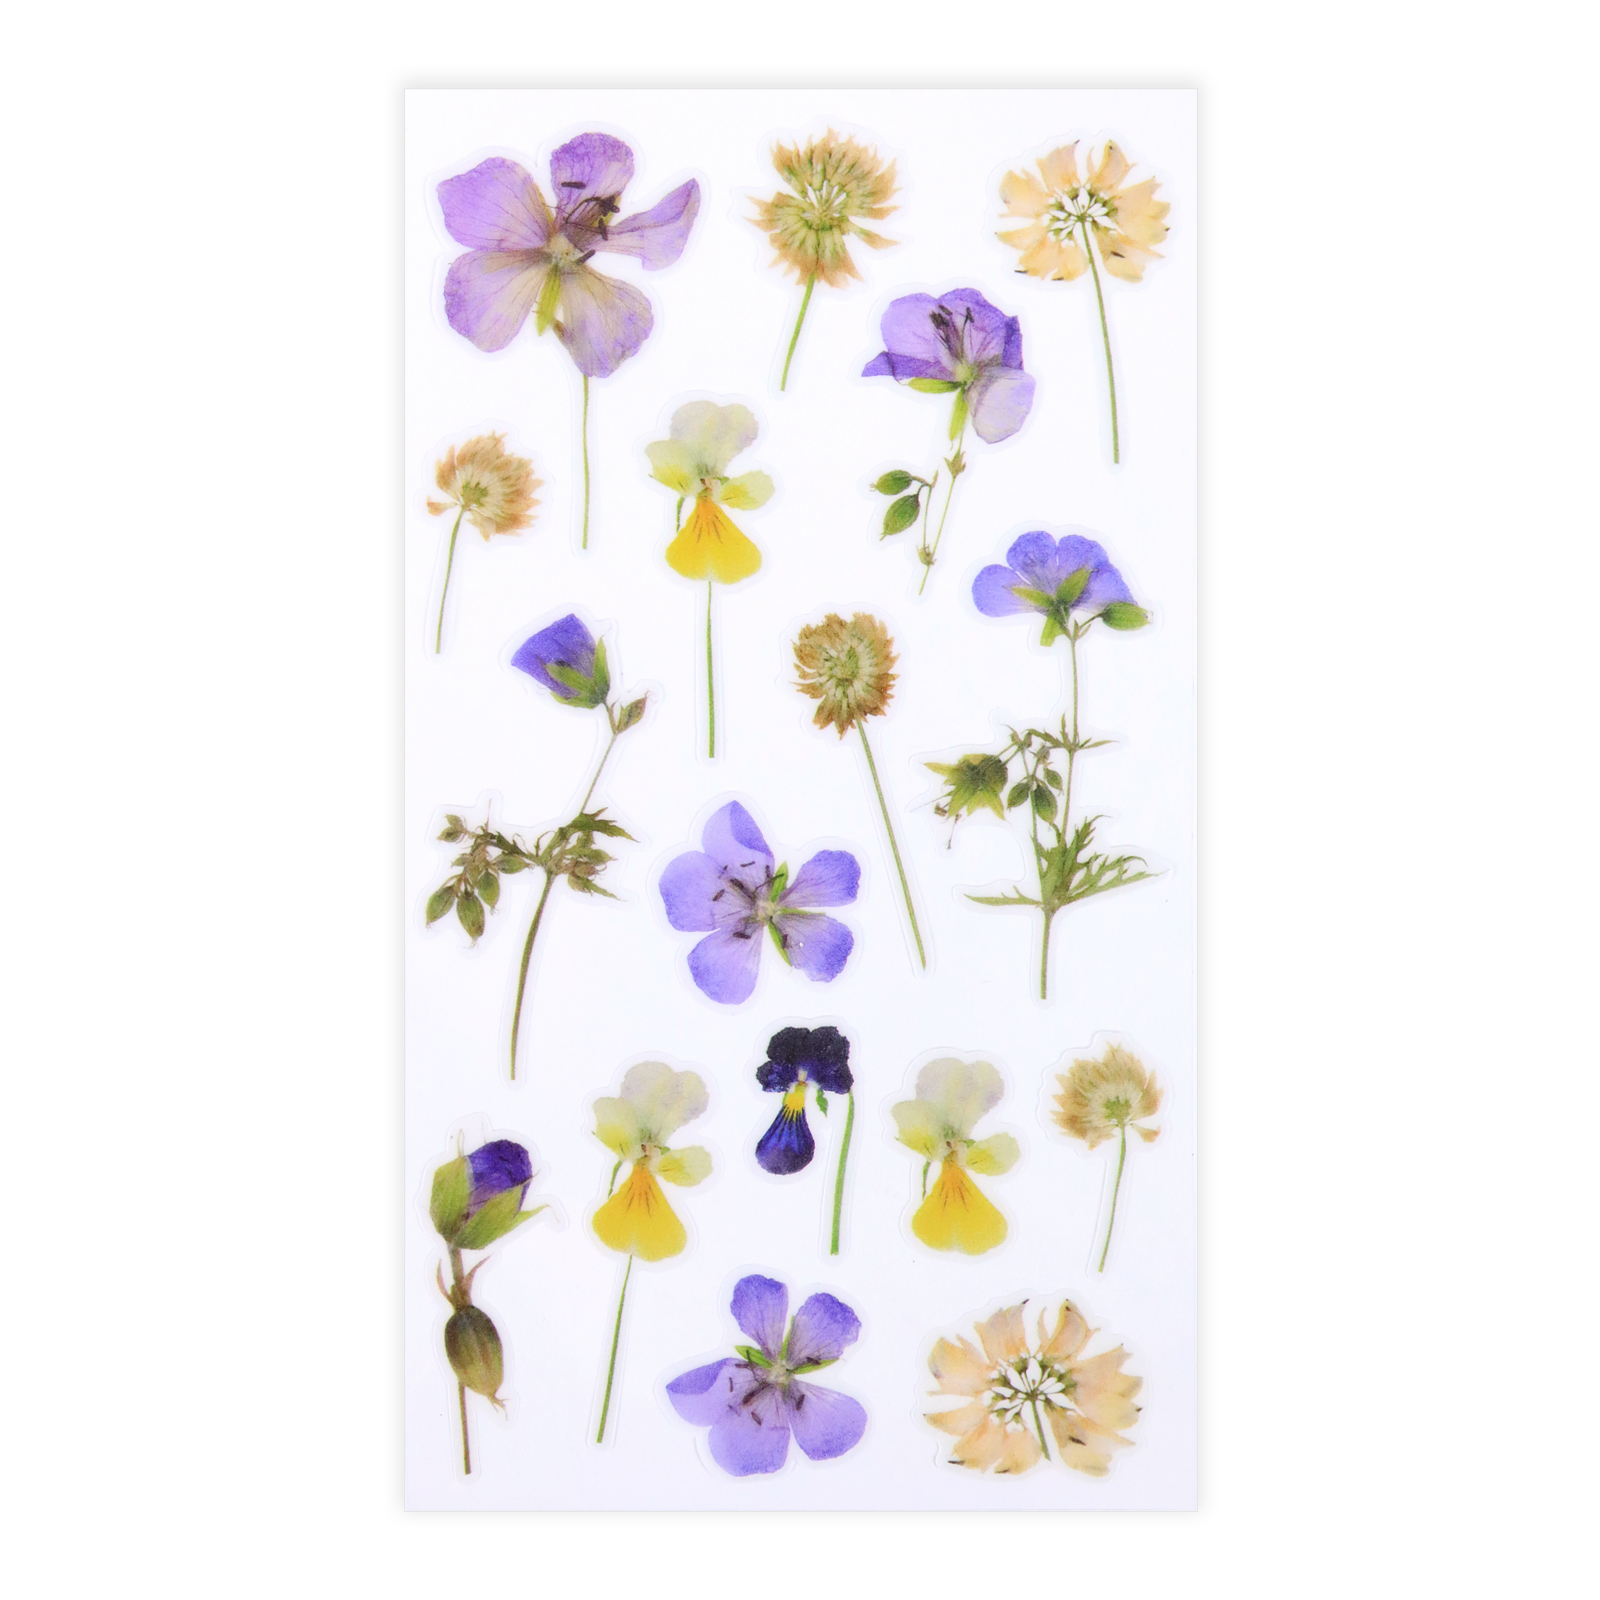 Flower Stickers by Recollections™